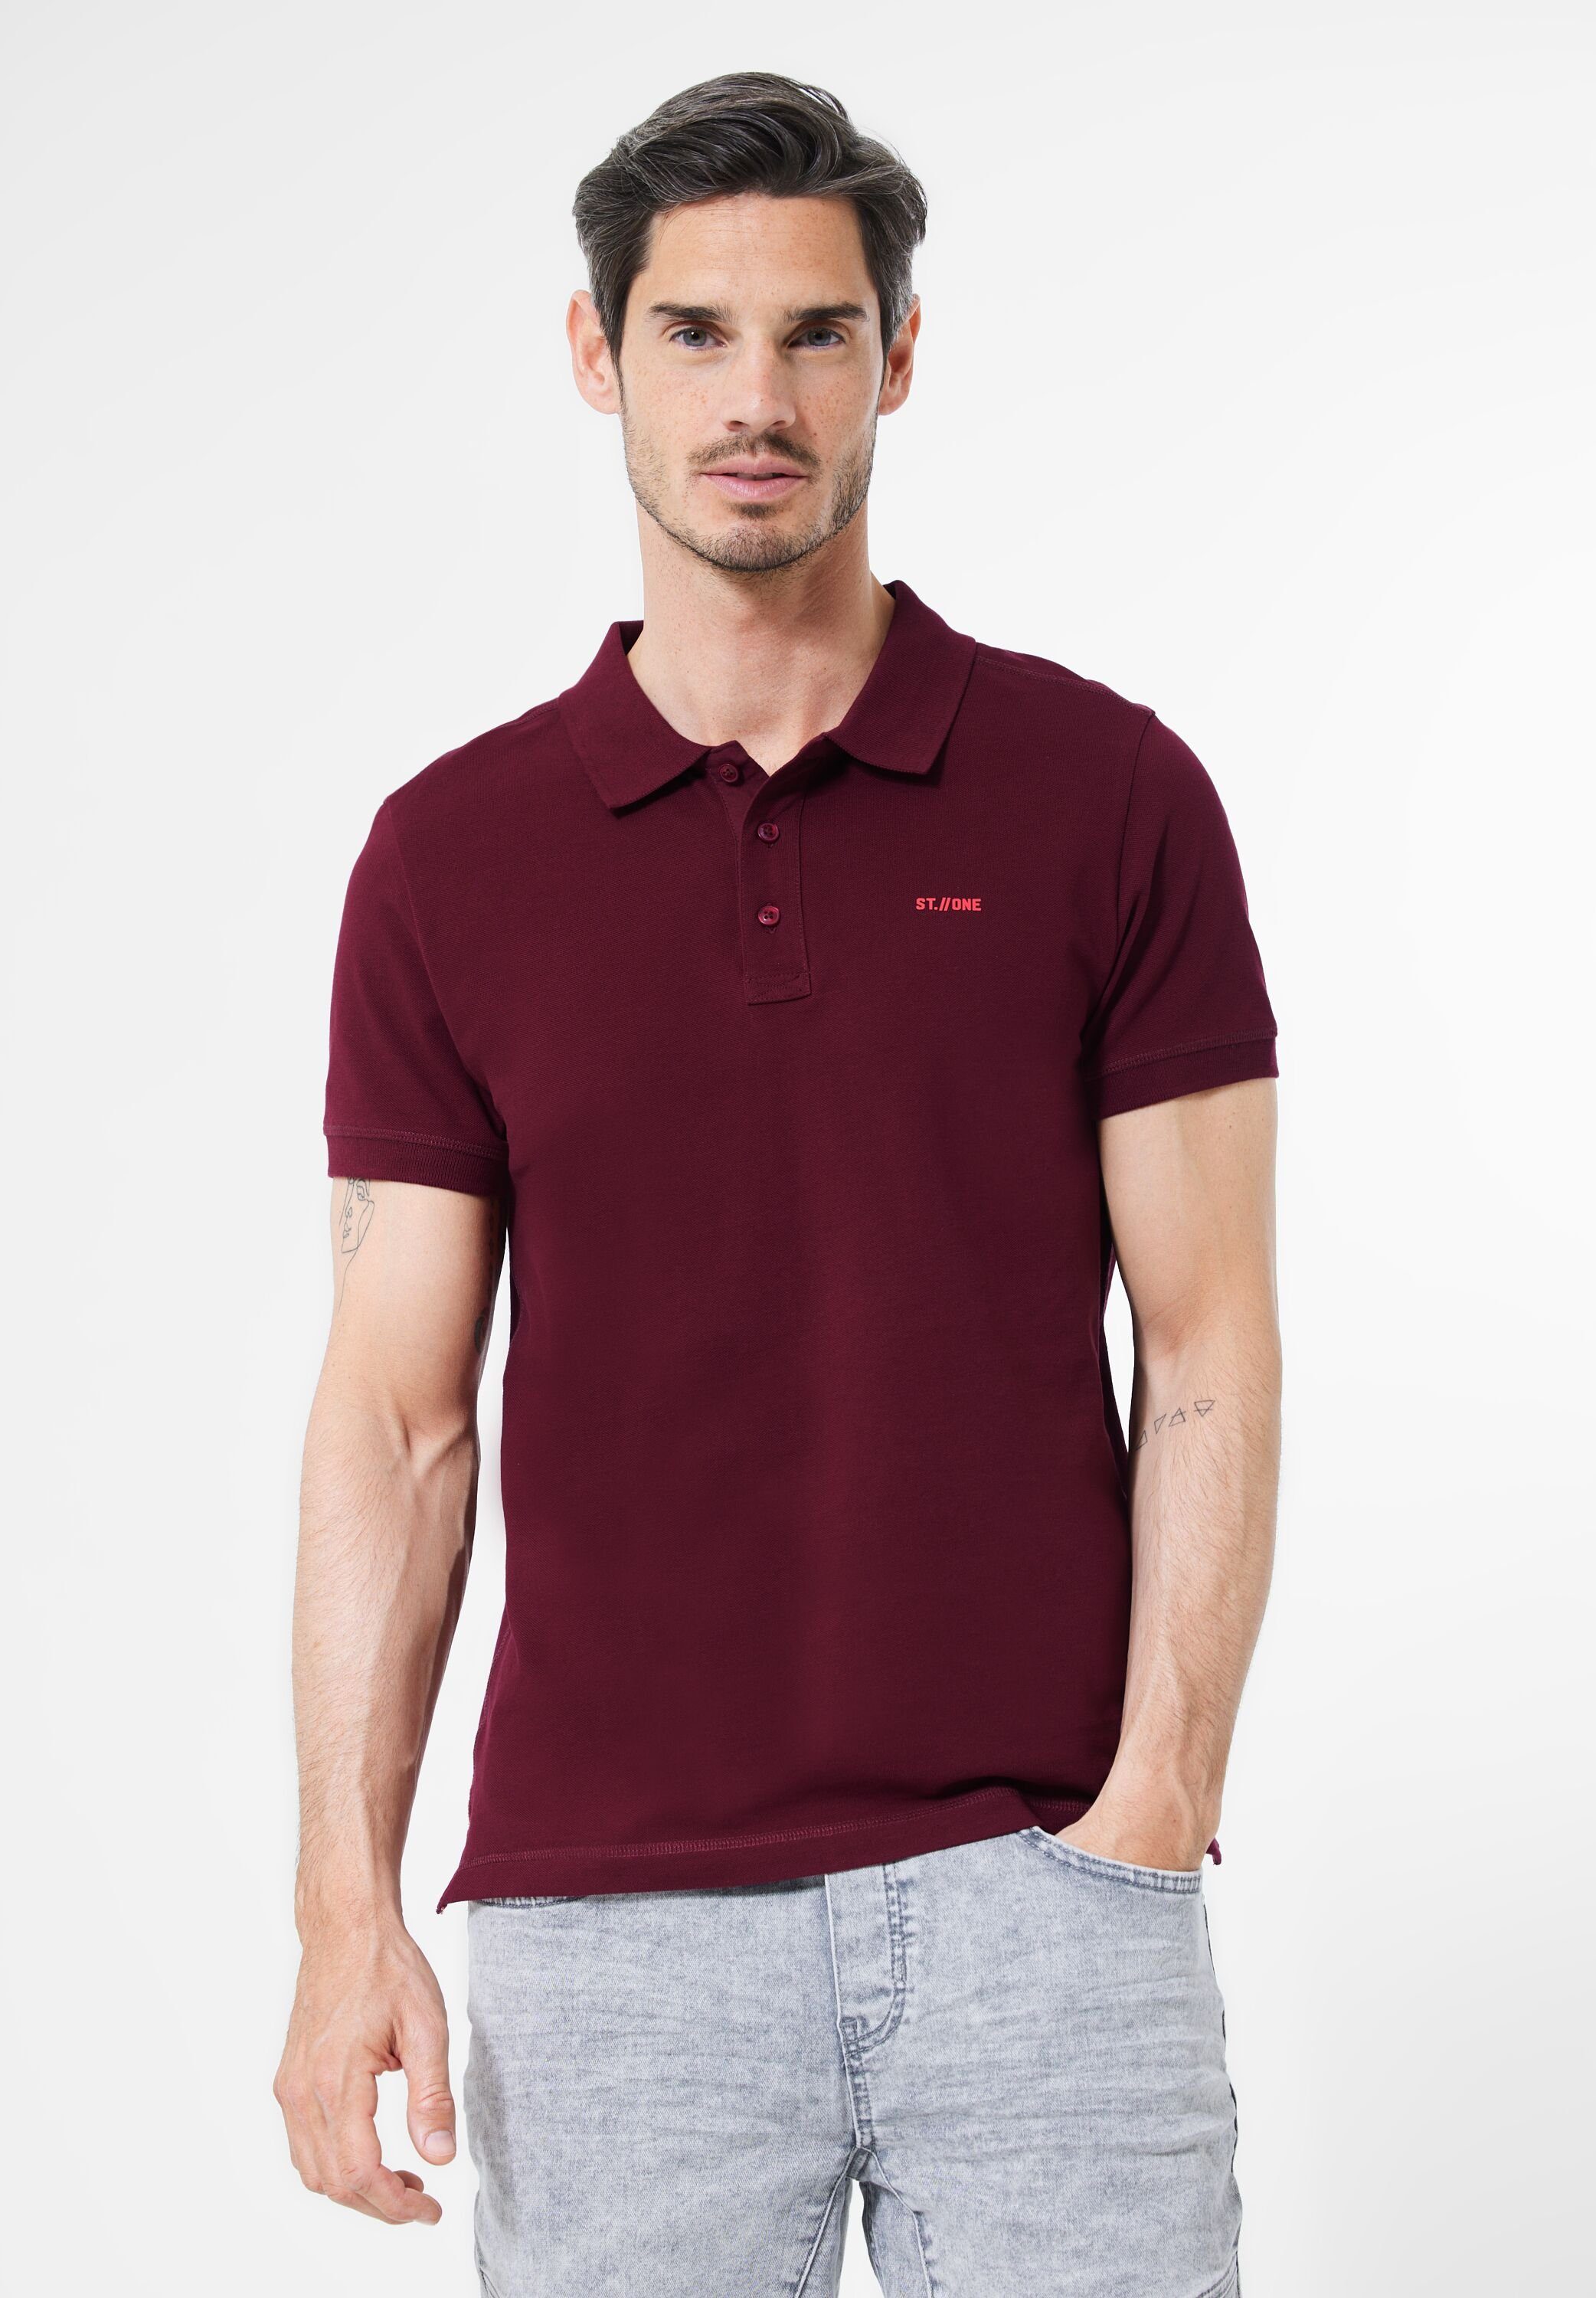 STREET ONE MEN Poloshirt in Unifarbe portwine red | Poloshirts